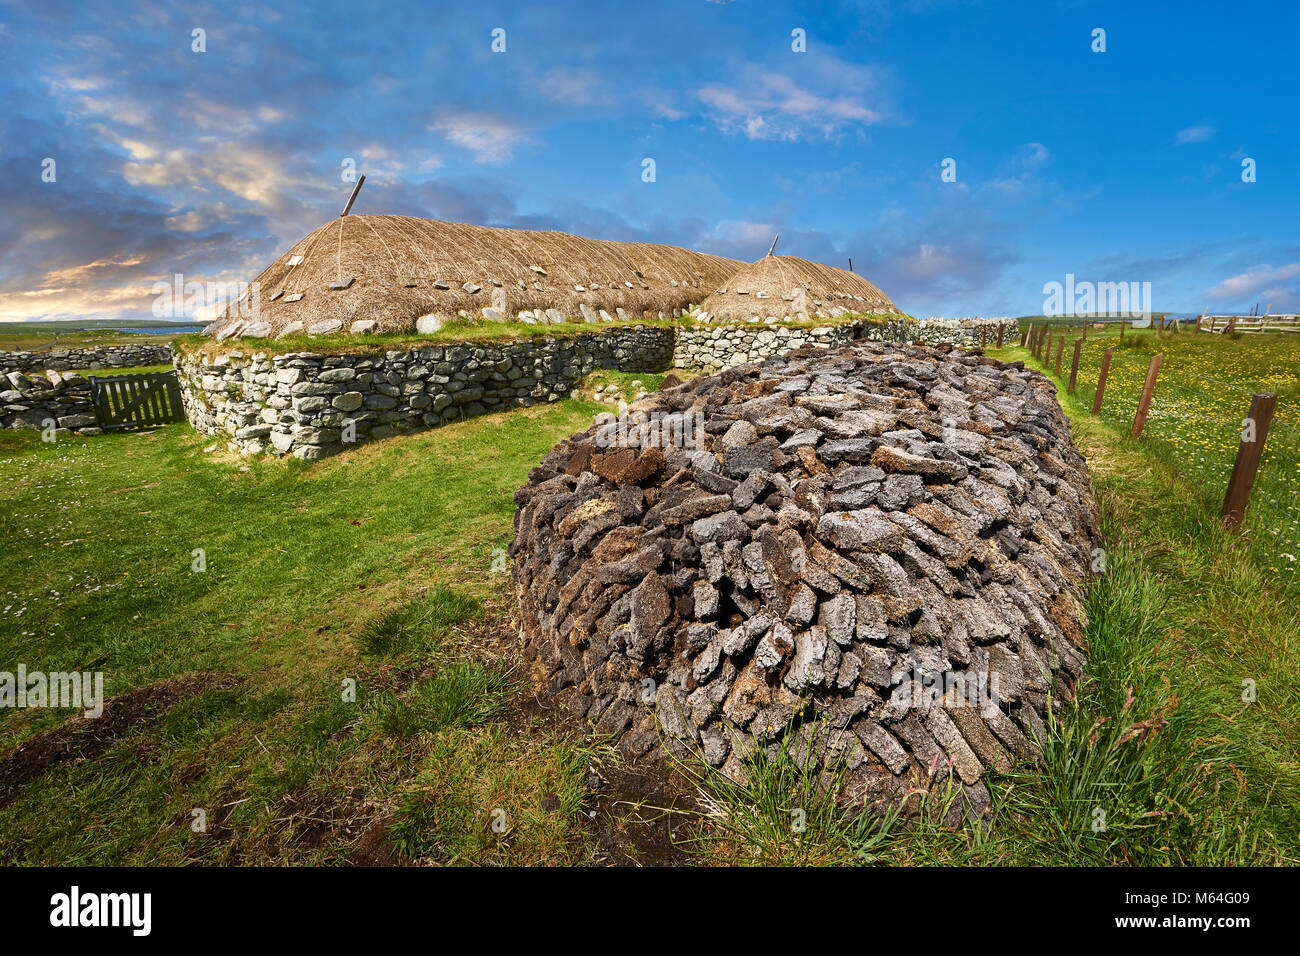 Picture & image peat pile oustide the exterior with stone walls and thatched roof of The historic Blackhouse, 24 Arnol, Bragar, Isle of Lewis, Scotlan Stock Photo